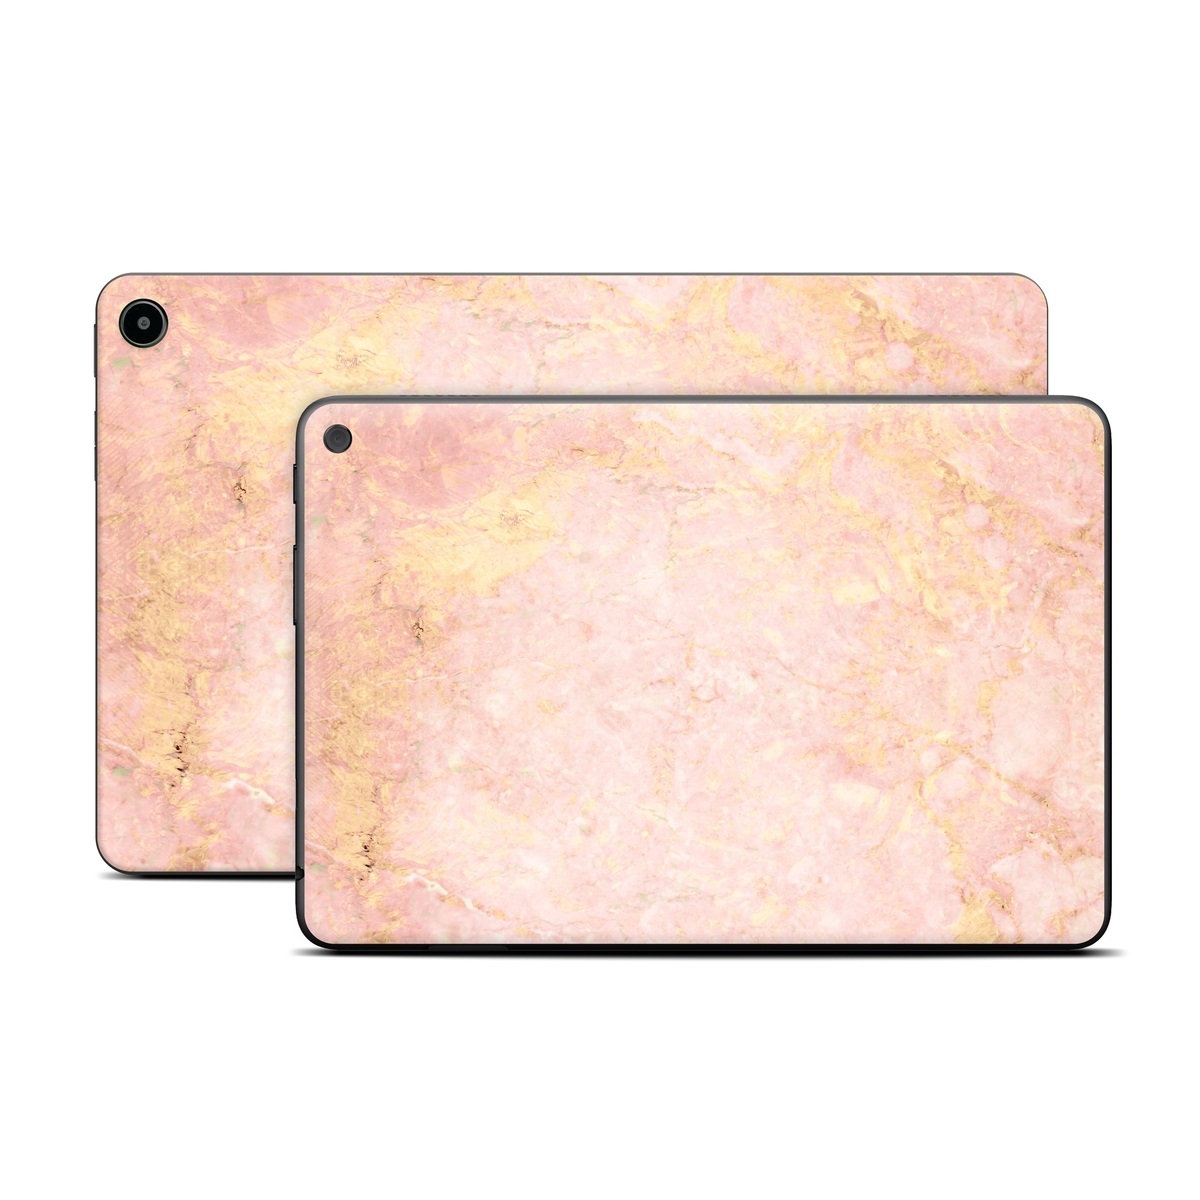 Amazon Fire Tablet Series Skin Skin design of Pink, Peach, Wallpaper, Pattern, with pink, yellow, orange colors